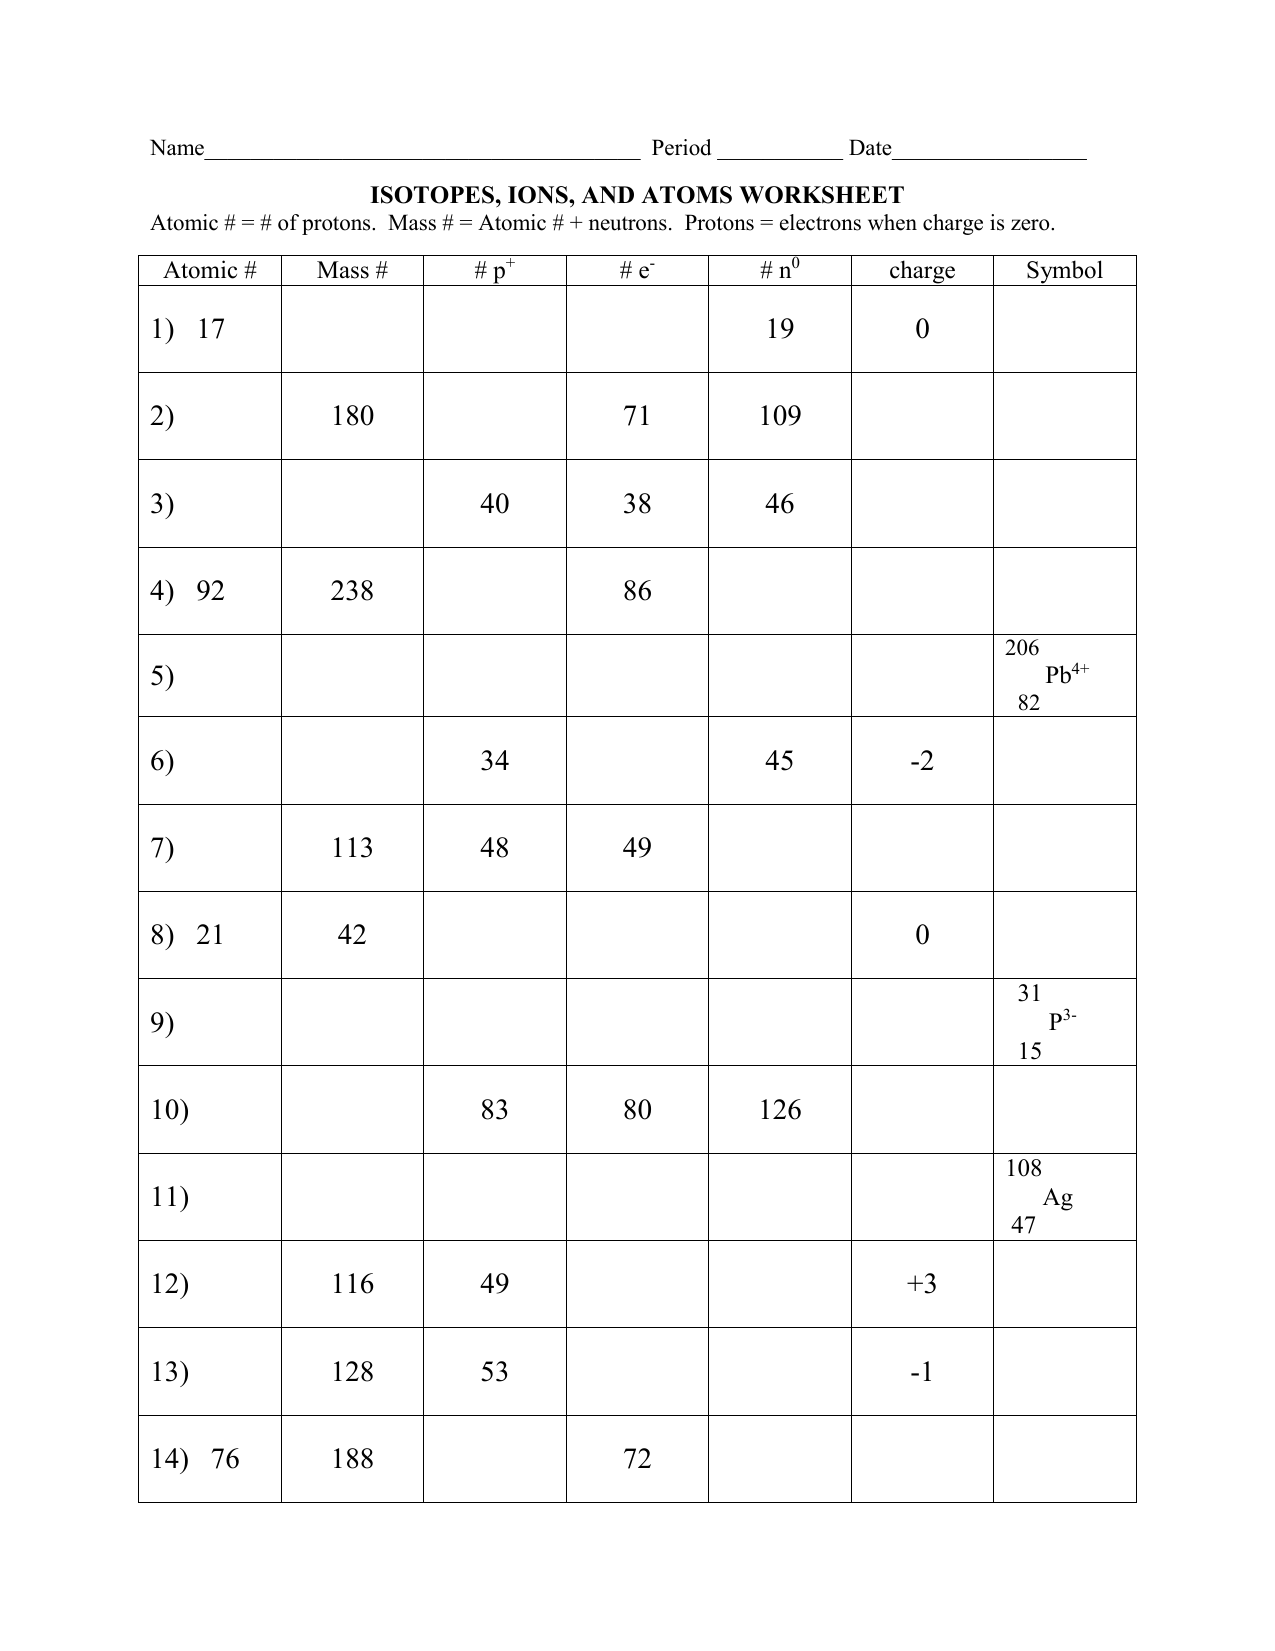 Isotopes Ions and Atoms WS Pertaining To Isotopes Ions And Atoms Worksheet